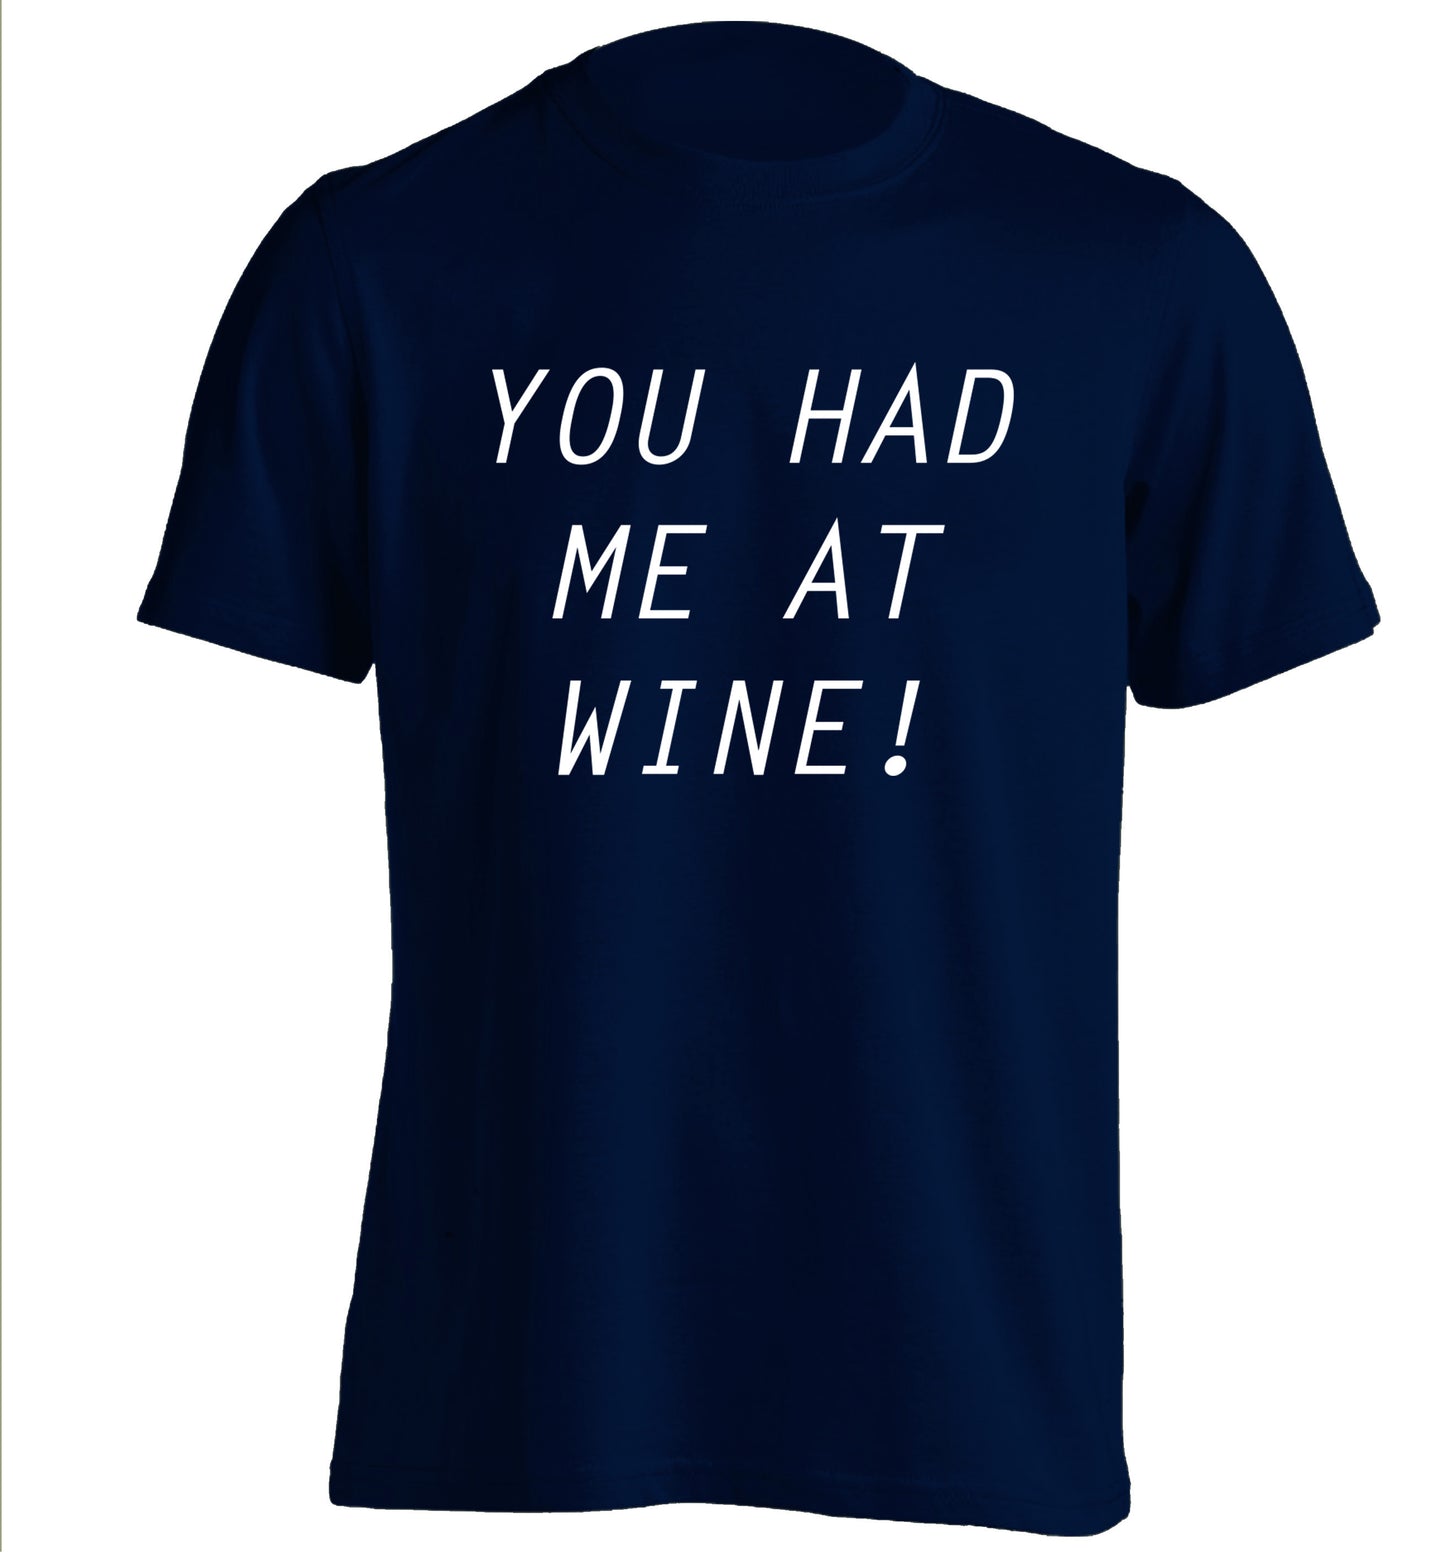 You had me at wine adults unisex navy Tshirt 2XL